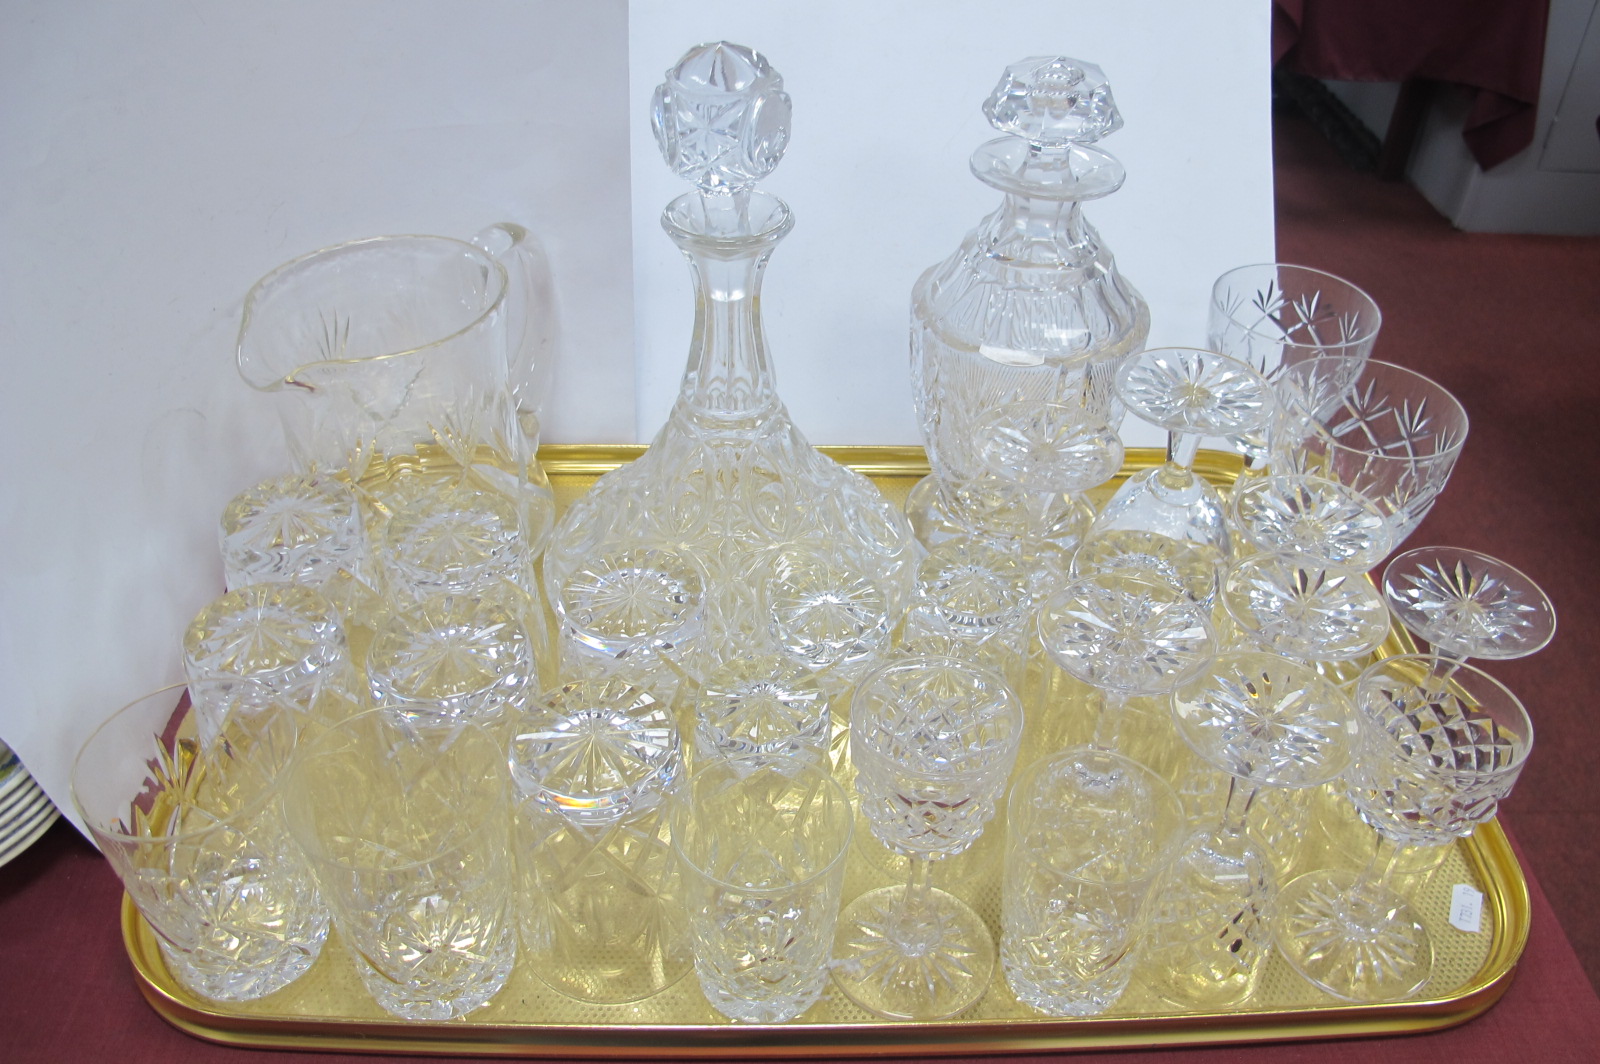 Two Decanters, water jug, drinking glasses:- One Tray.